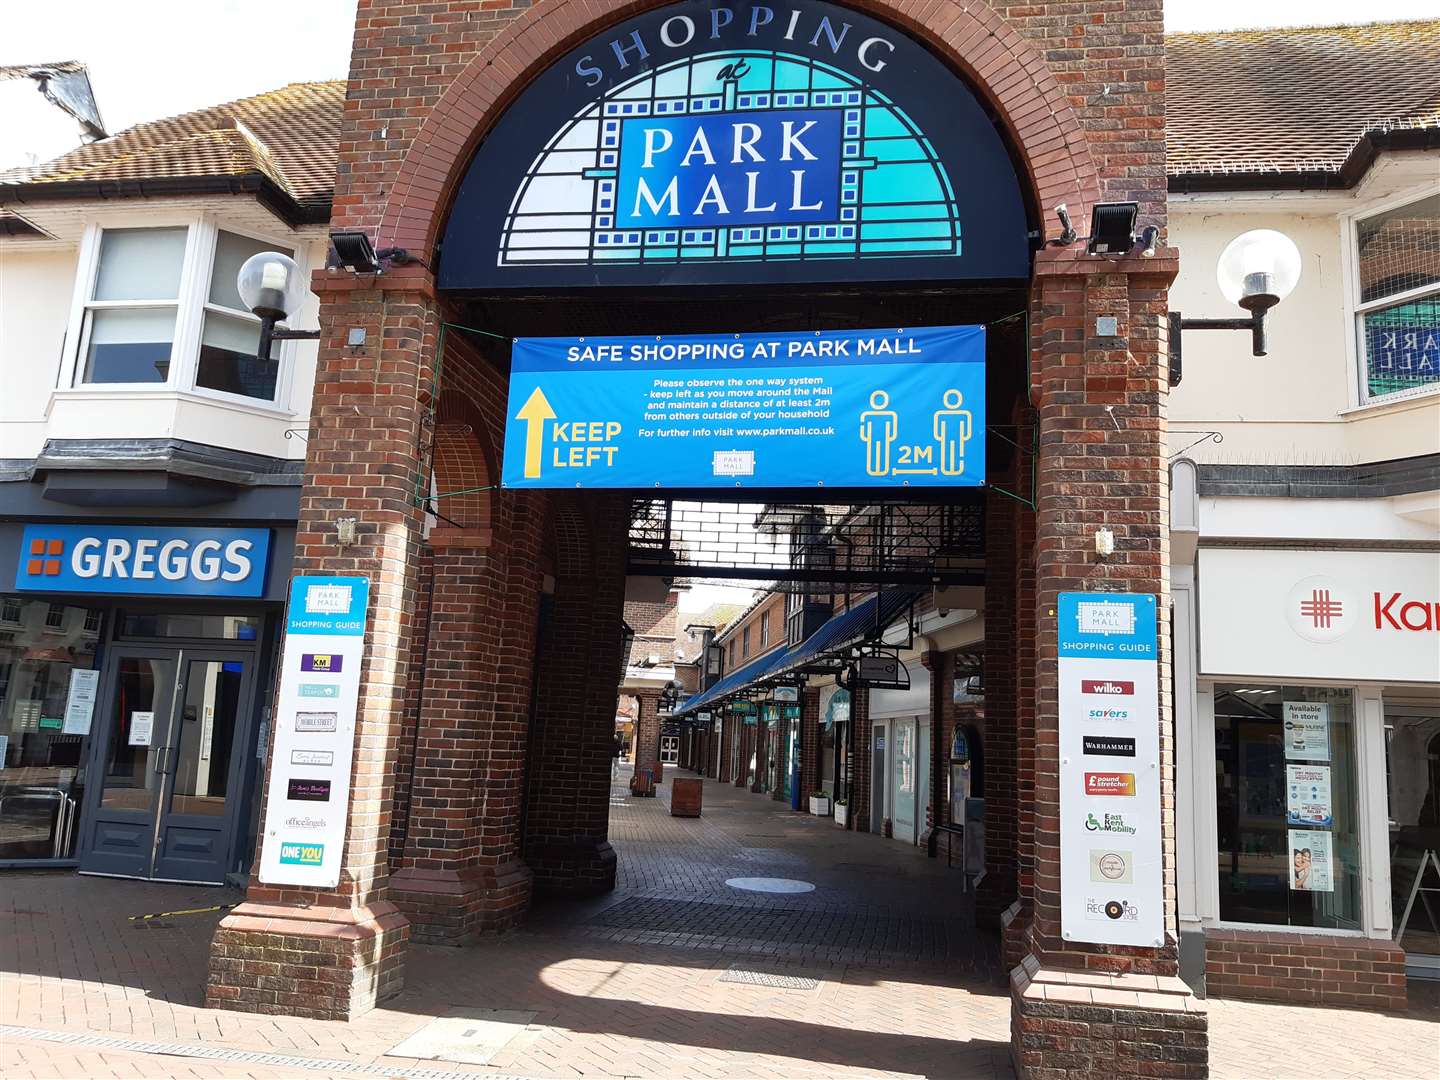 A one-way system will be in place in the council-owned Park Mall shopping centre